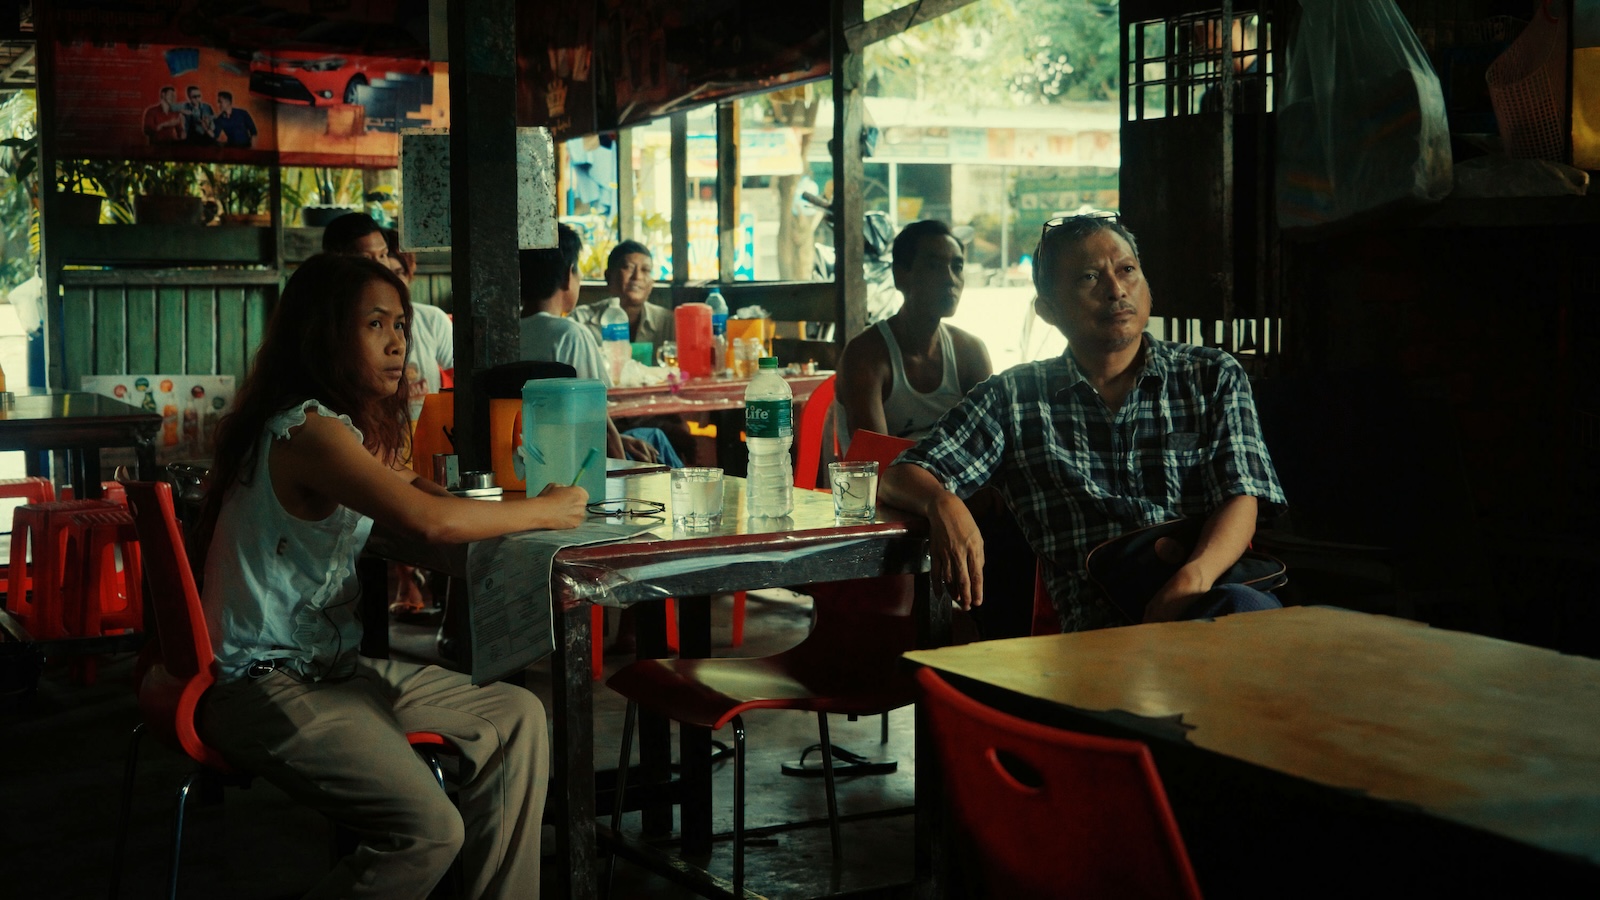 A group of people sit in a cafe in an Asian country looking up at a TV offscreen with serious expressions